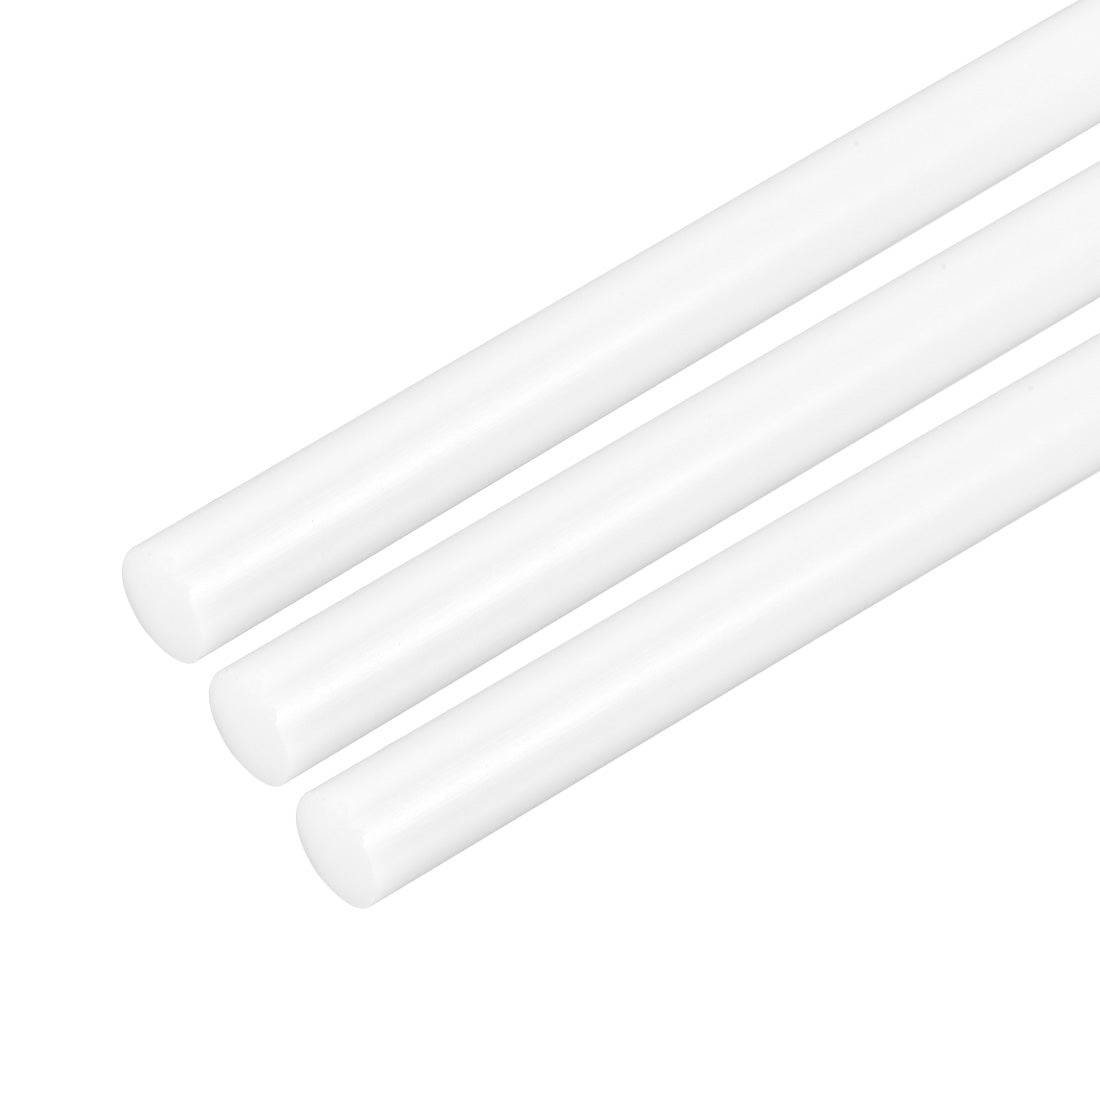 uxcell Uxcell Plastic Round Rod,8mm Dia 50cm White Engineering Plastic Round Bar 3pcs